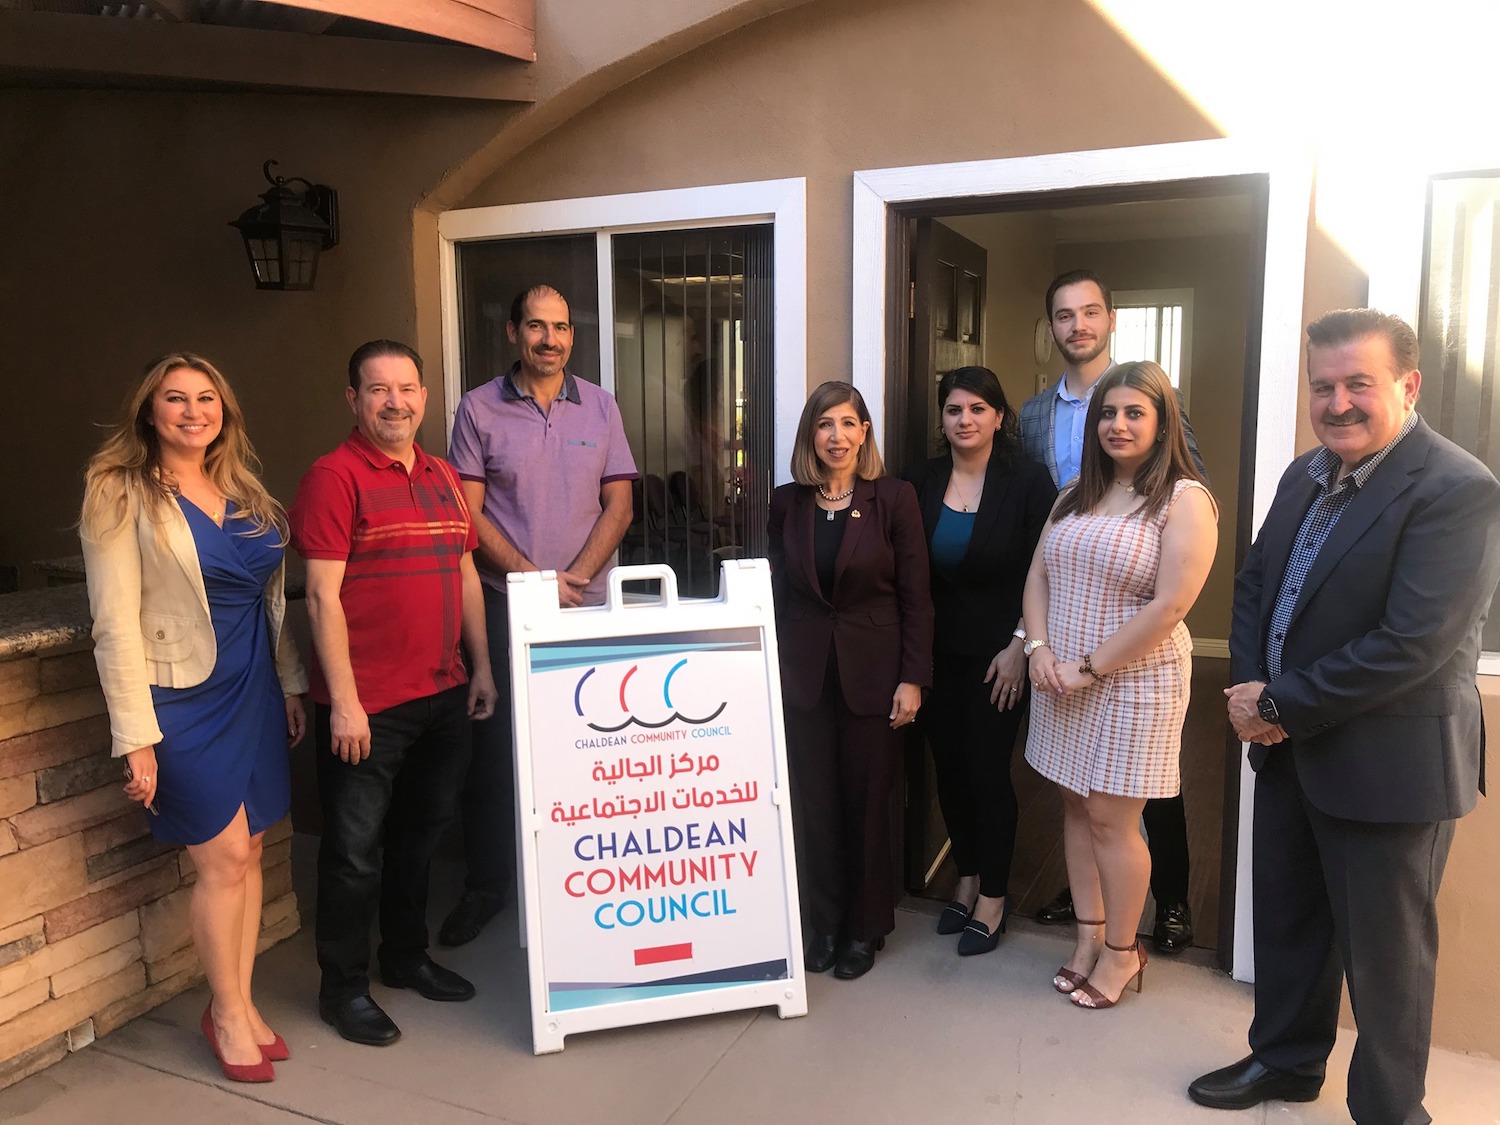 Members of Chaldean Community Council in El Cajo, San Diego with DA Summer Stephan and executive director Jolyana Jirjees